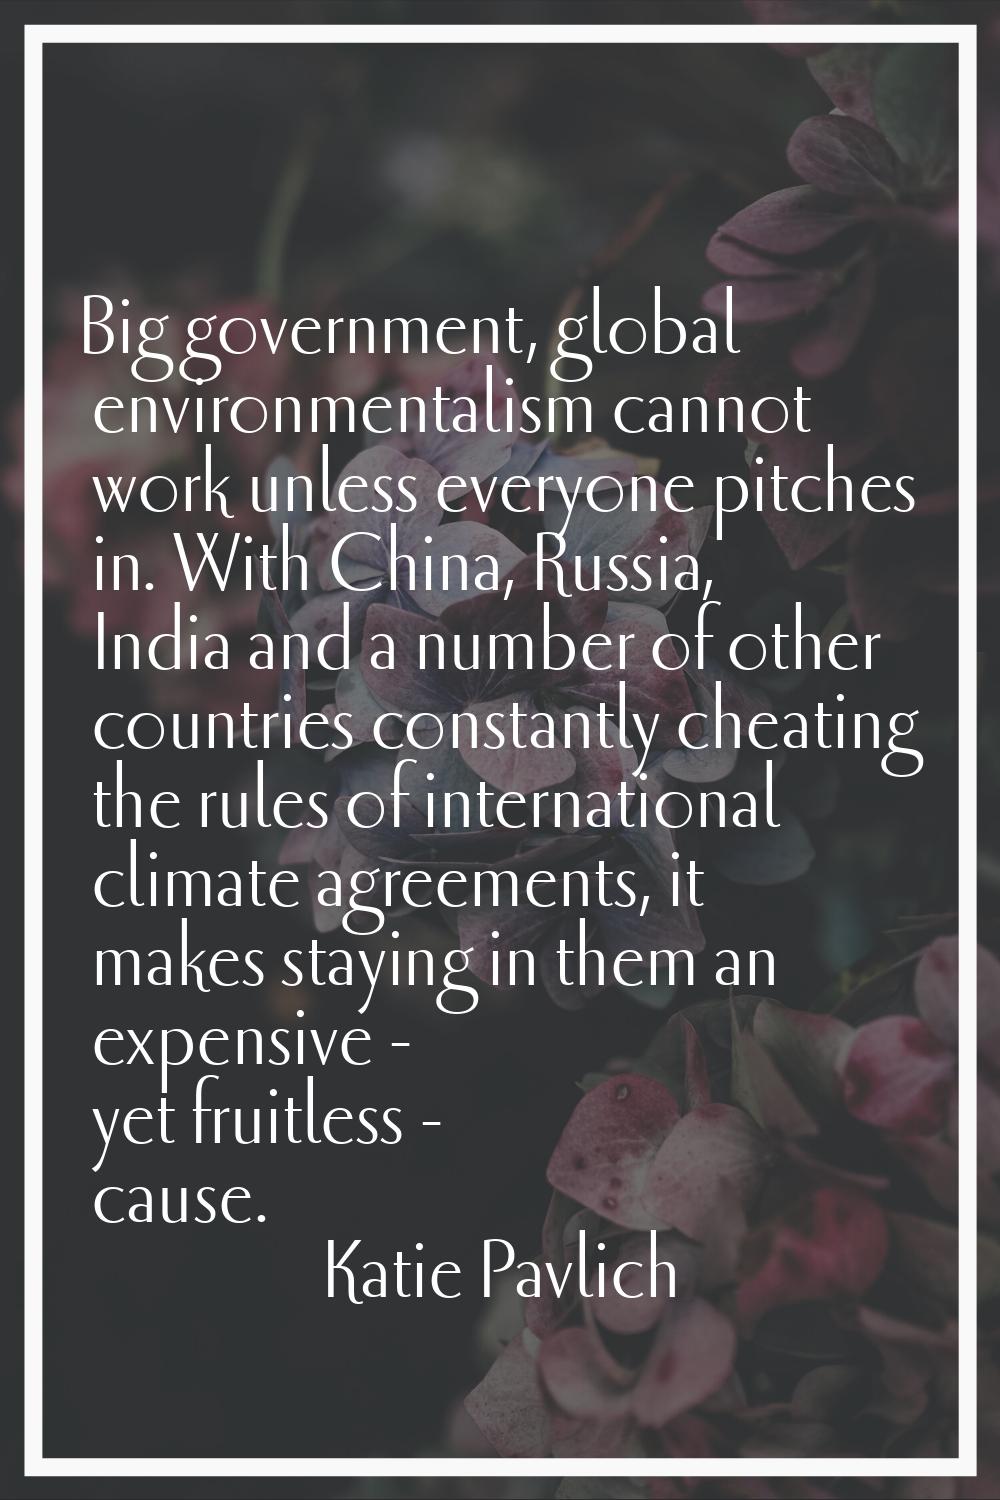 Big government, global environmentalism cannot work unless everyone pitches in. With China, Russia,